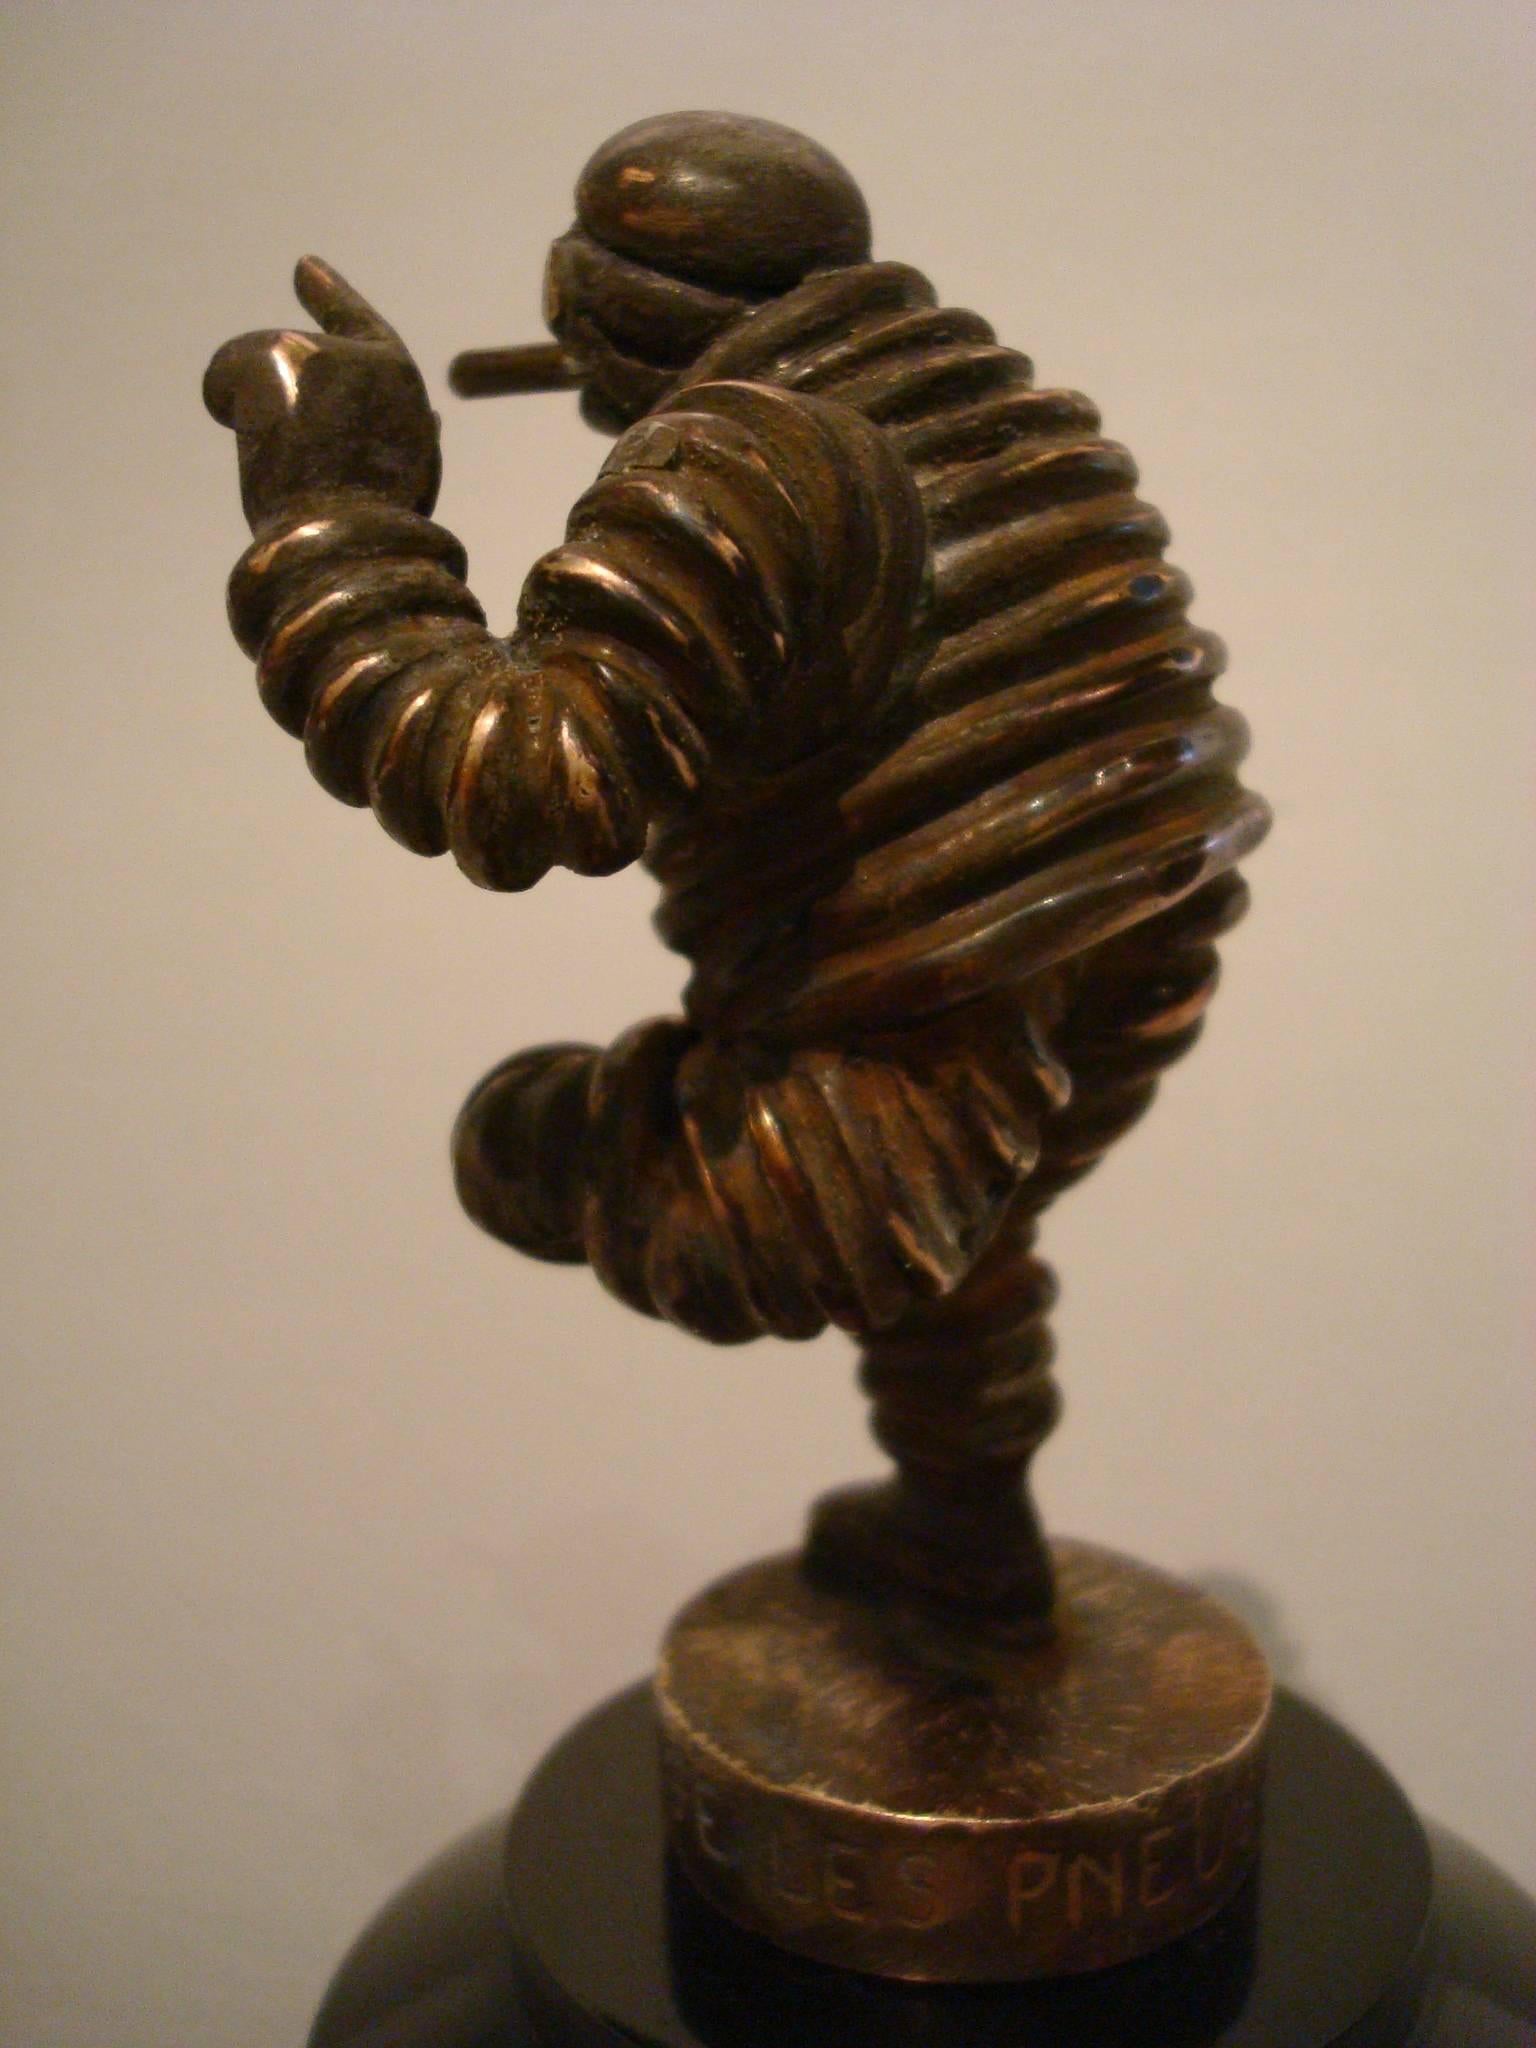 Michelin man bronze car mascot, hood ornament, Automobilia
This is a highly collectible Michelin man bronze car mascot. It´s approximate 4 inch tall depiction of the Michelin man, also known as Bibendum, joyfully raises his arm while jauntily